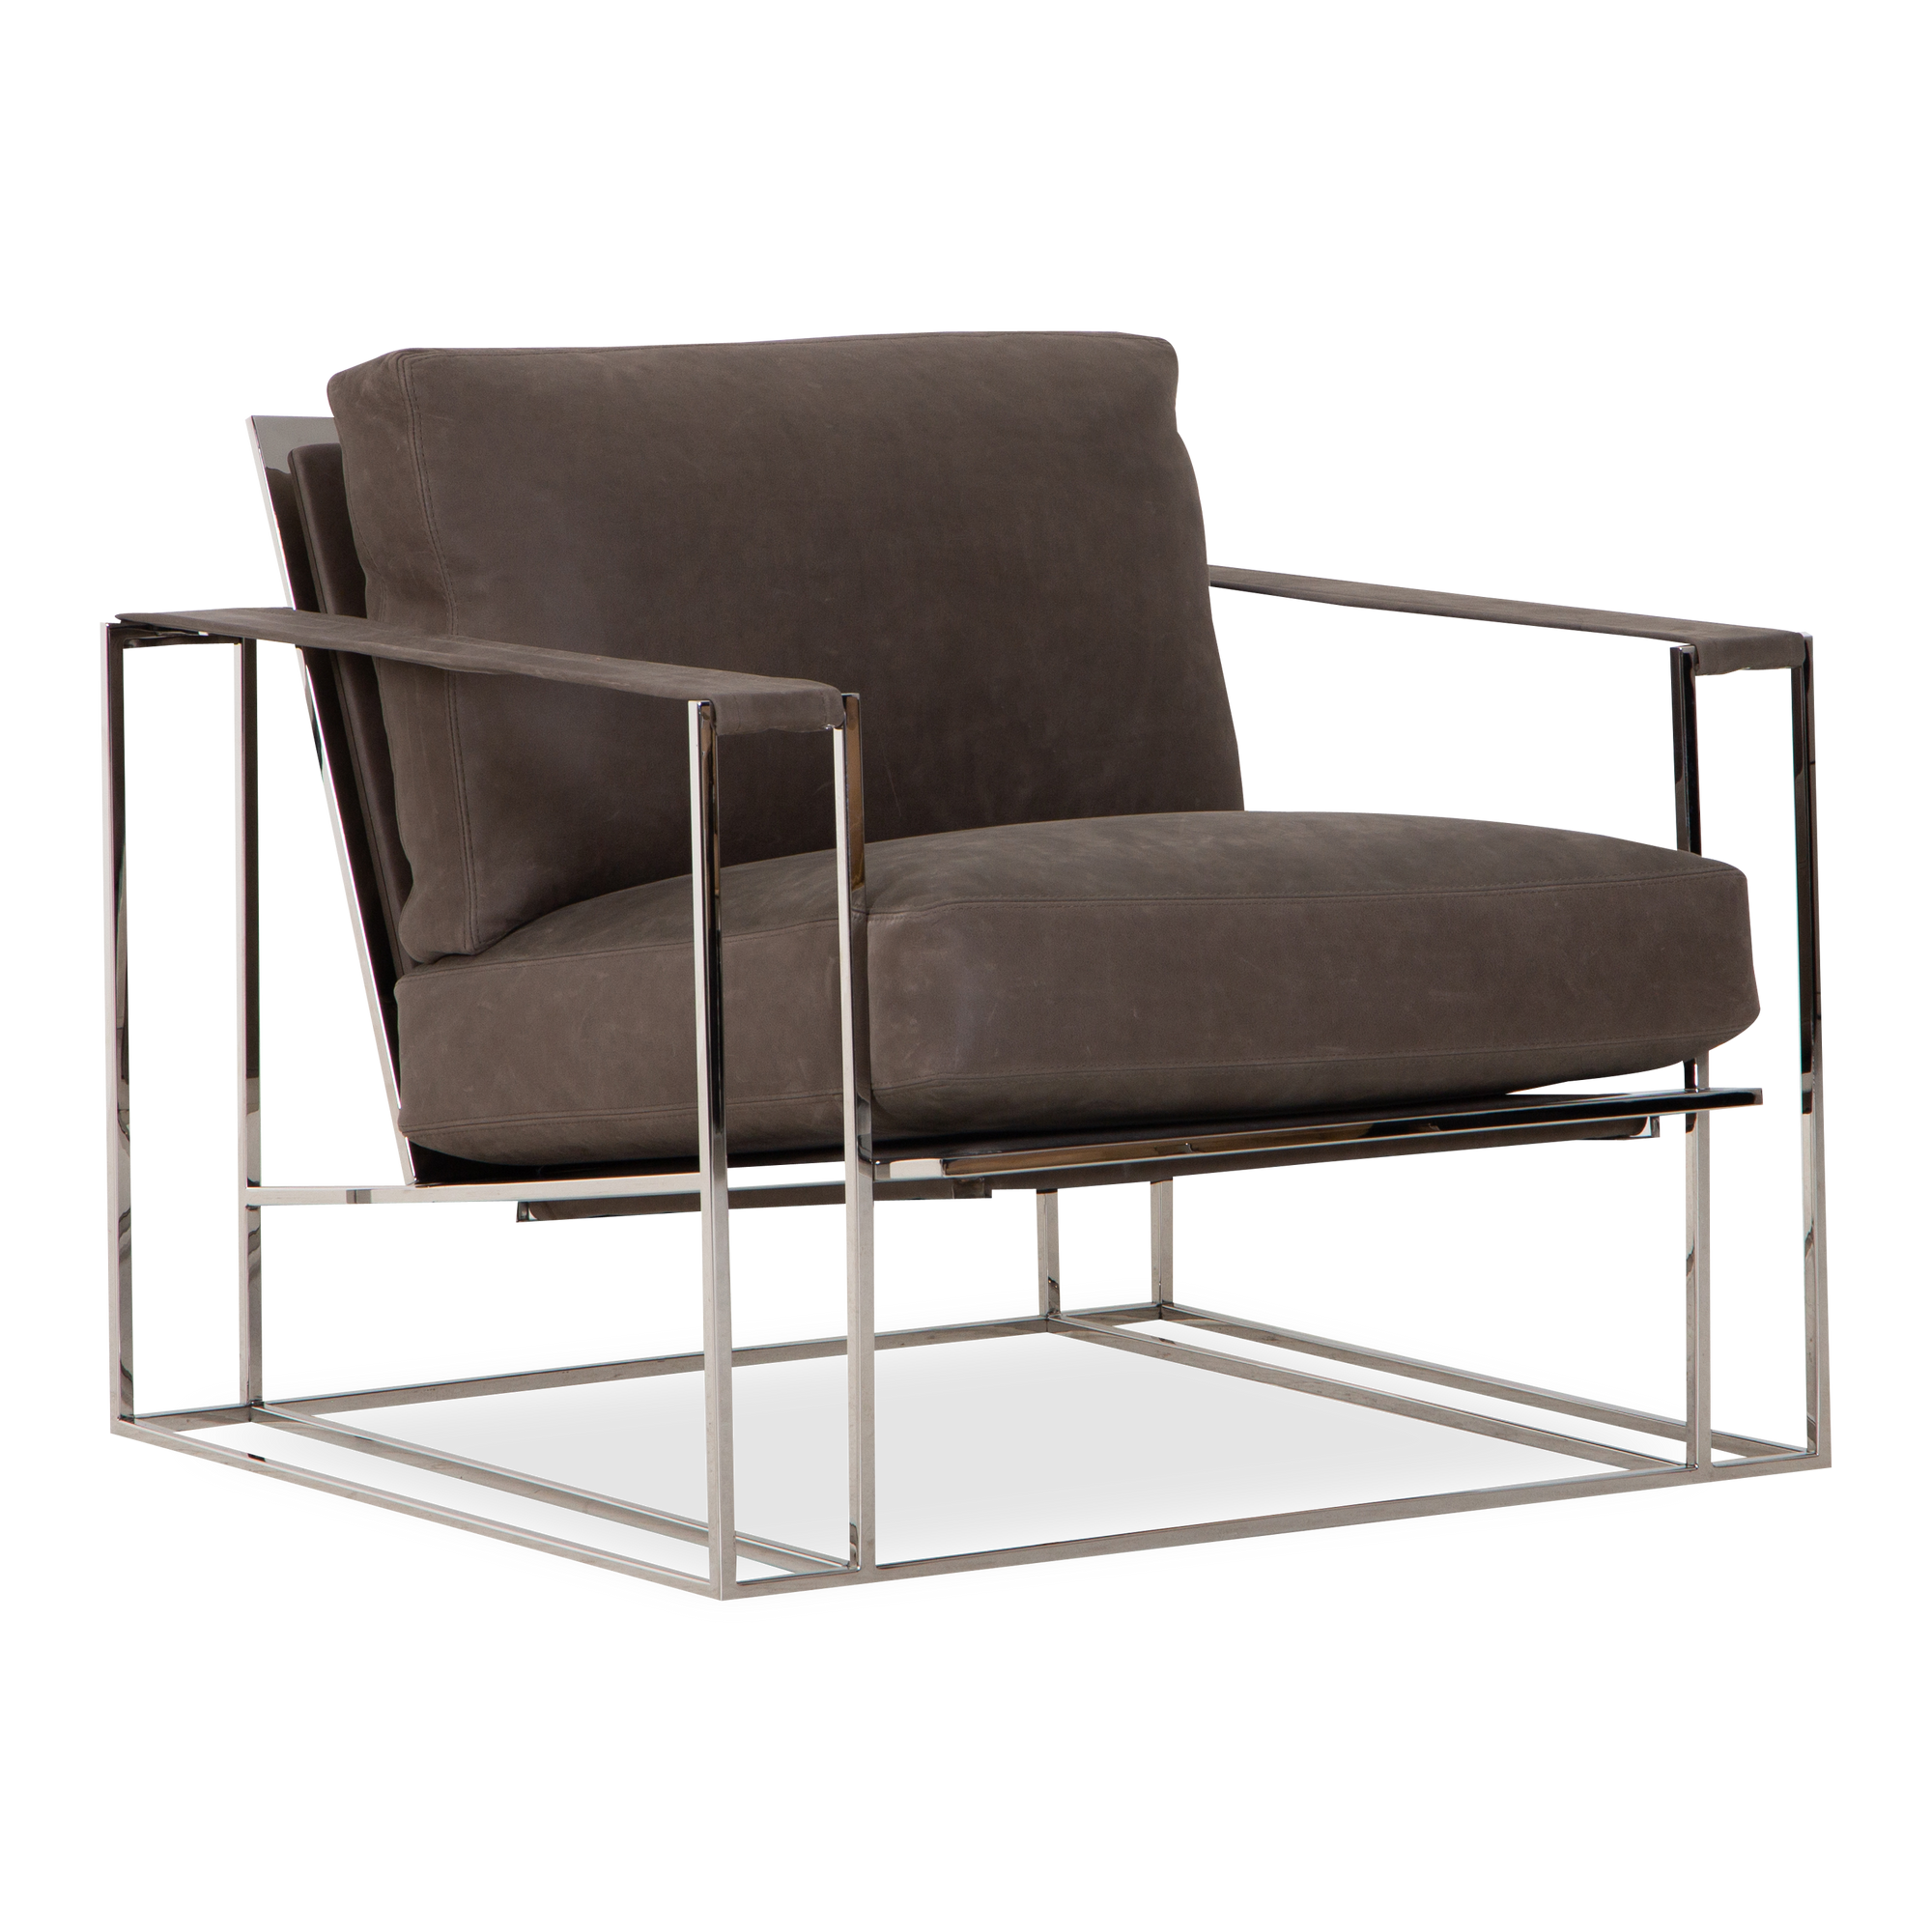 Originally designed by Milo Baughman in 1972, the Sling Chair will provide modern comfort to any interior.